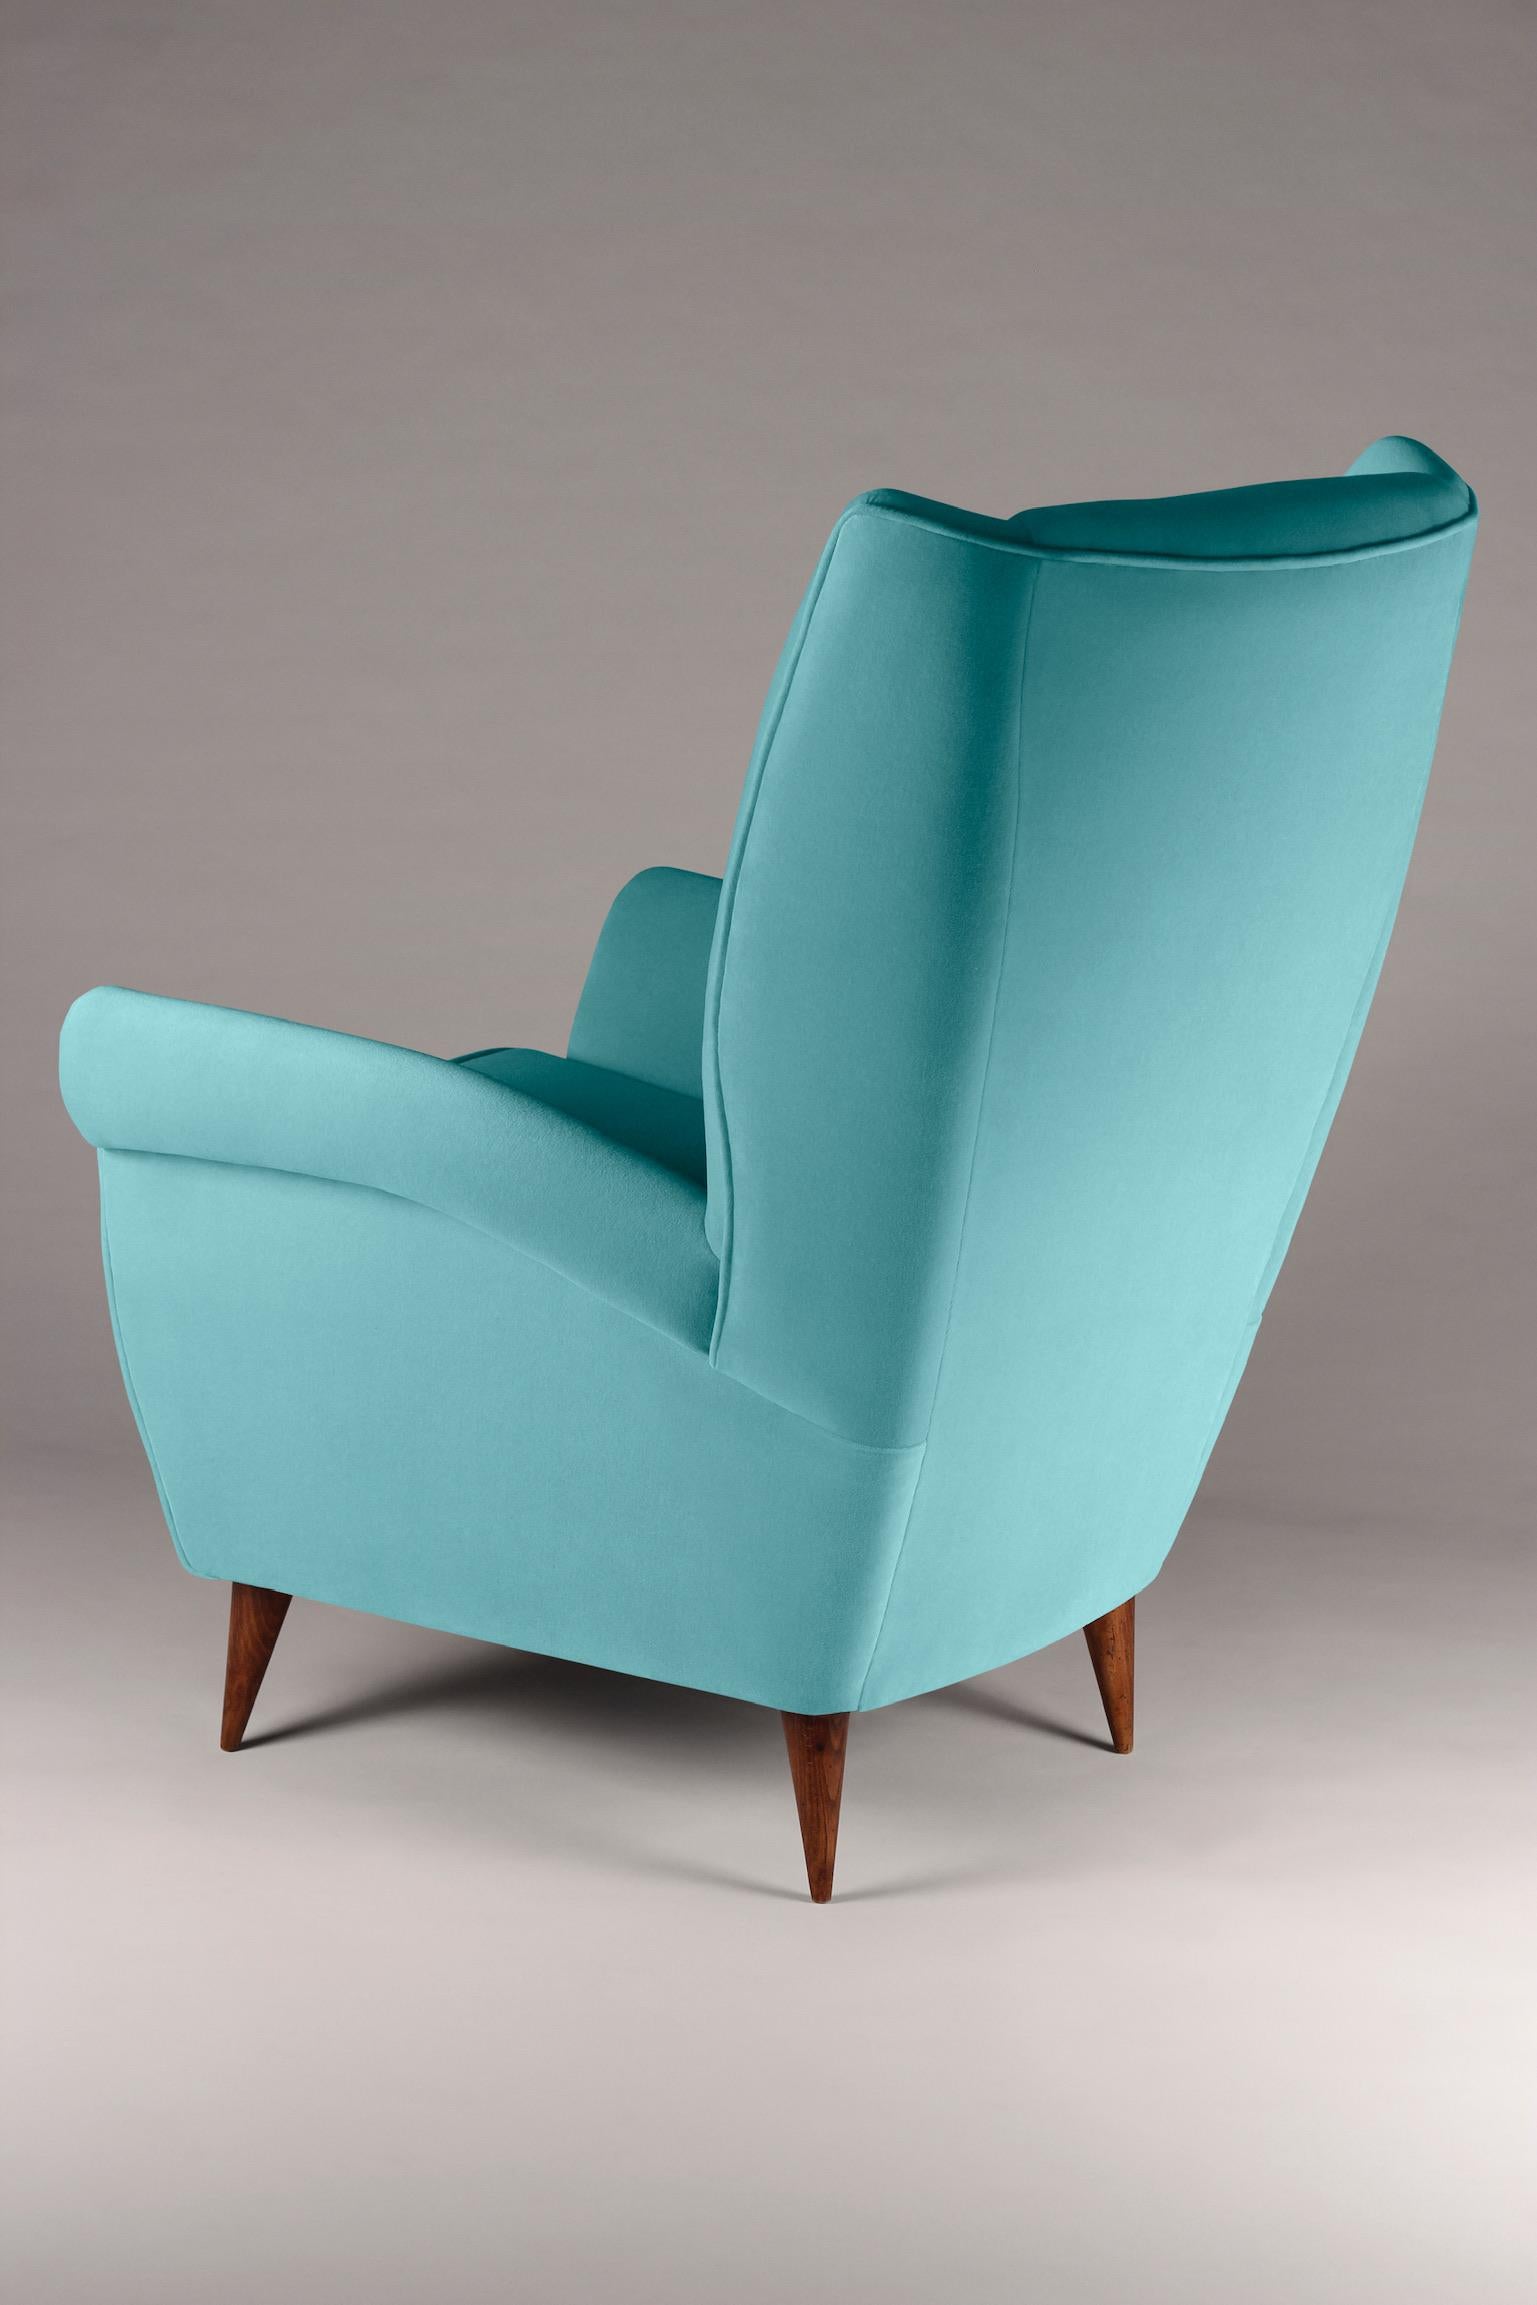 The high back lounge chair ‘Marcello’ was inspired by stylish Italian design from the 1950s and is now created by English craftsman for the 21st century. We developed a lounge chair with the option of producing any number to your fabric